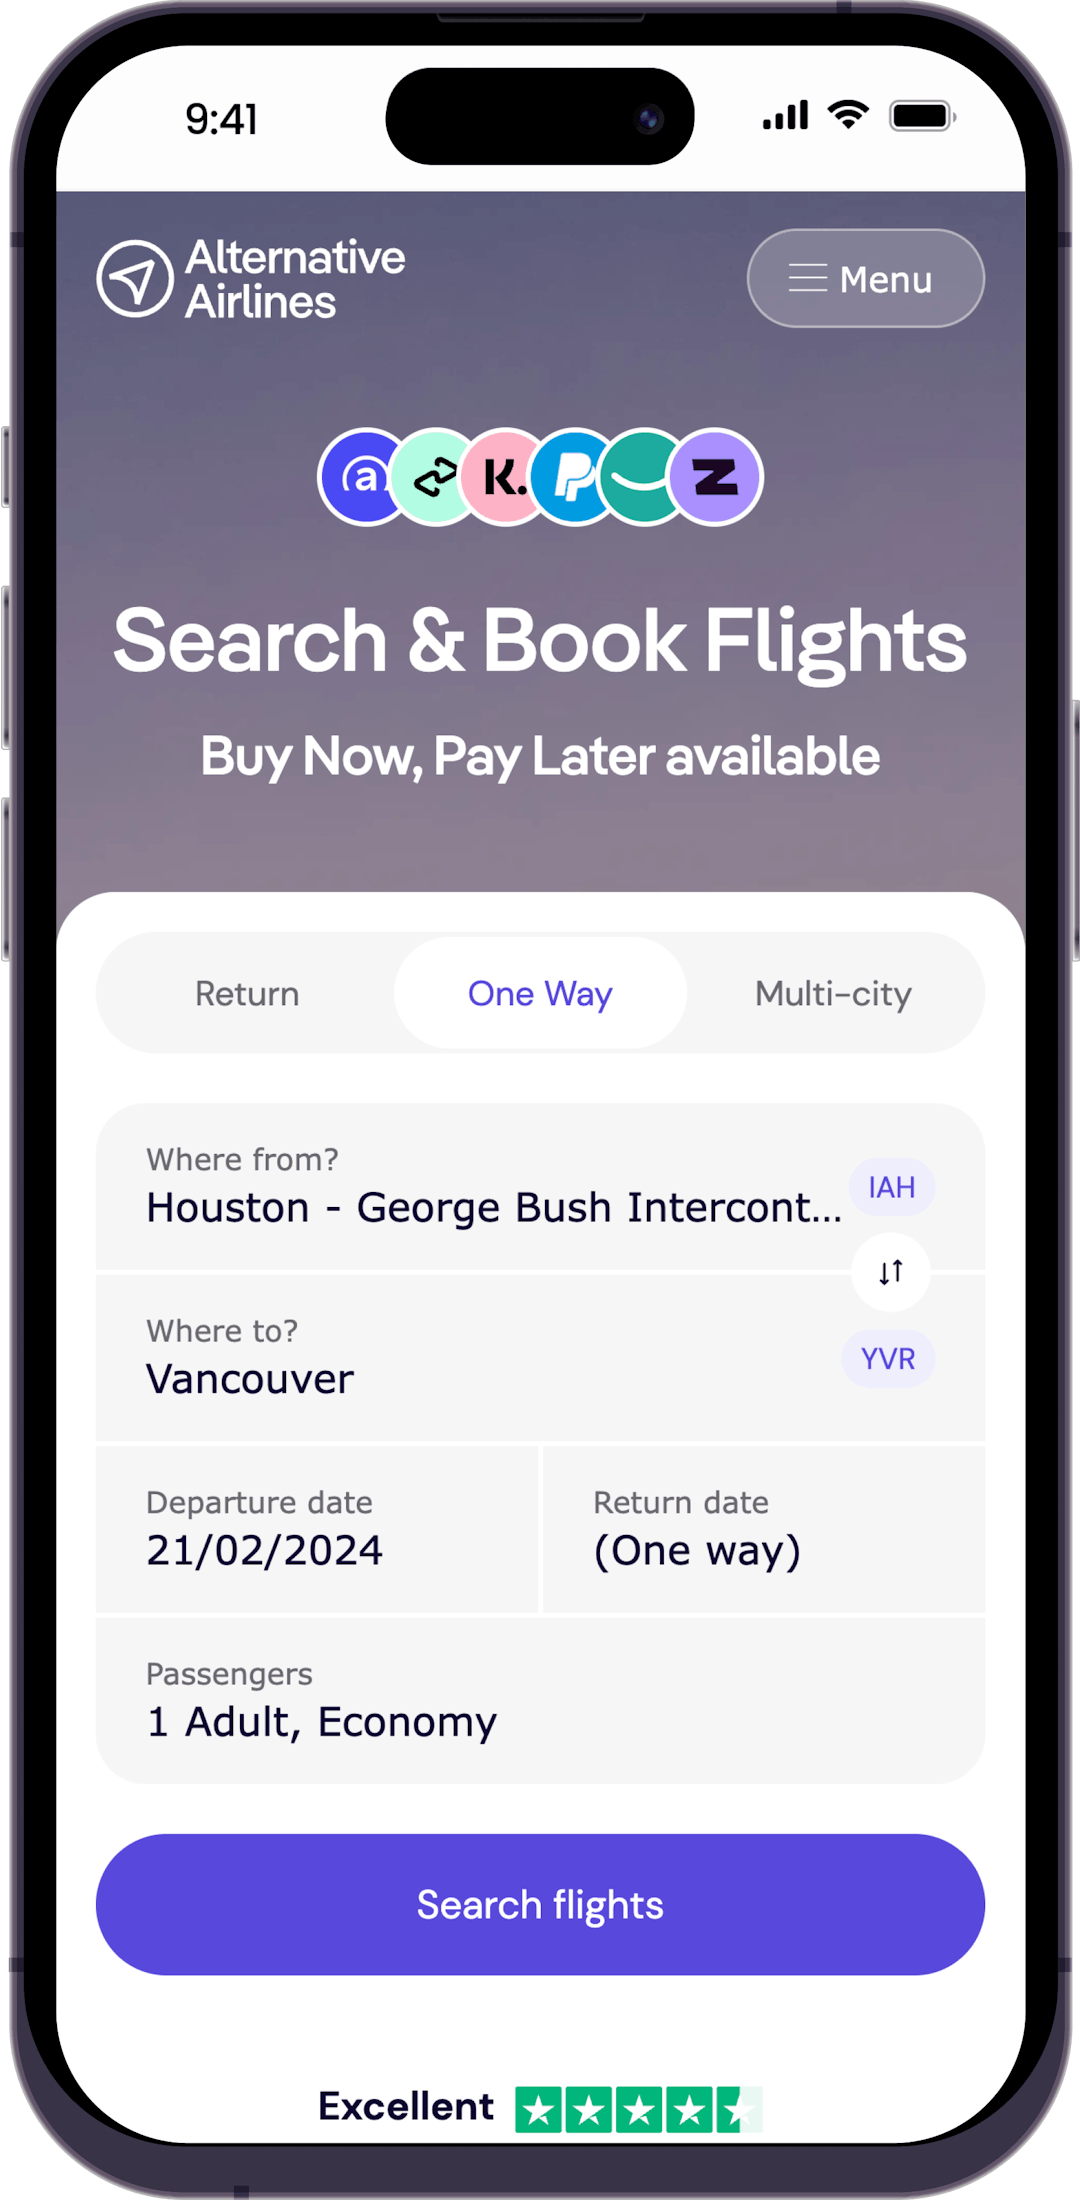 Step 1 - Search for Flights